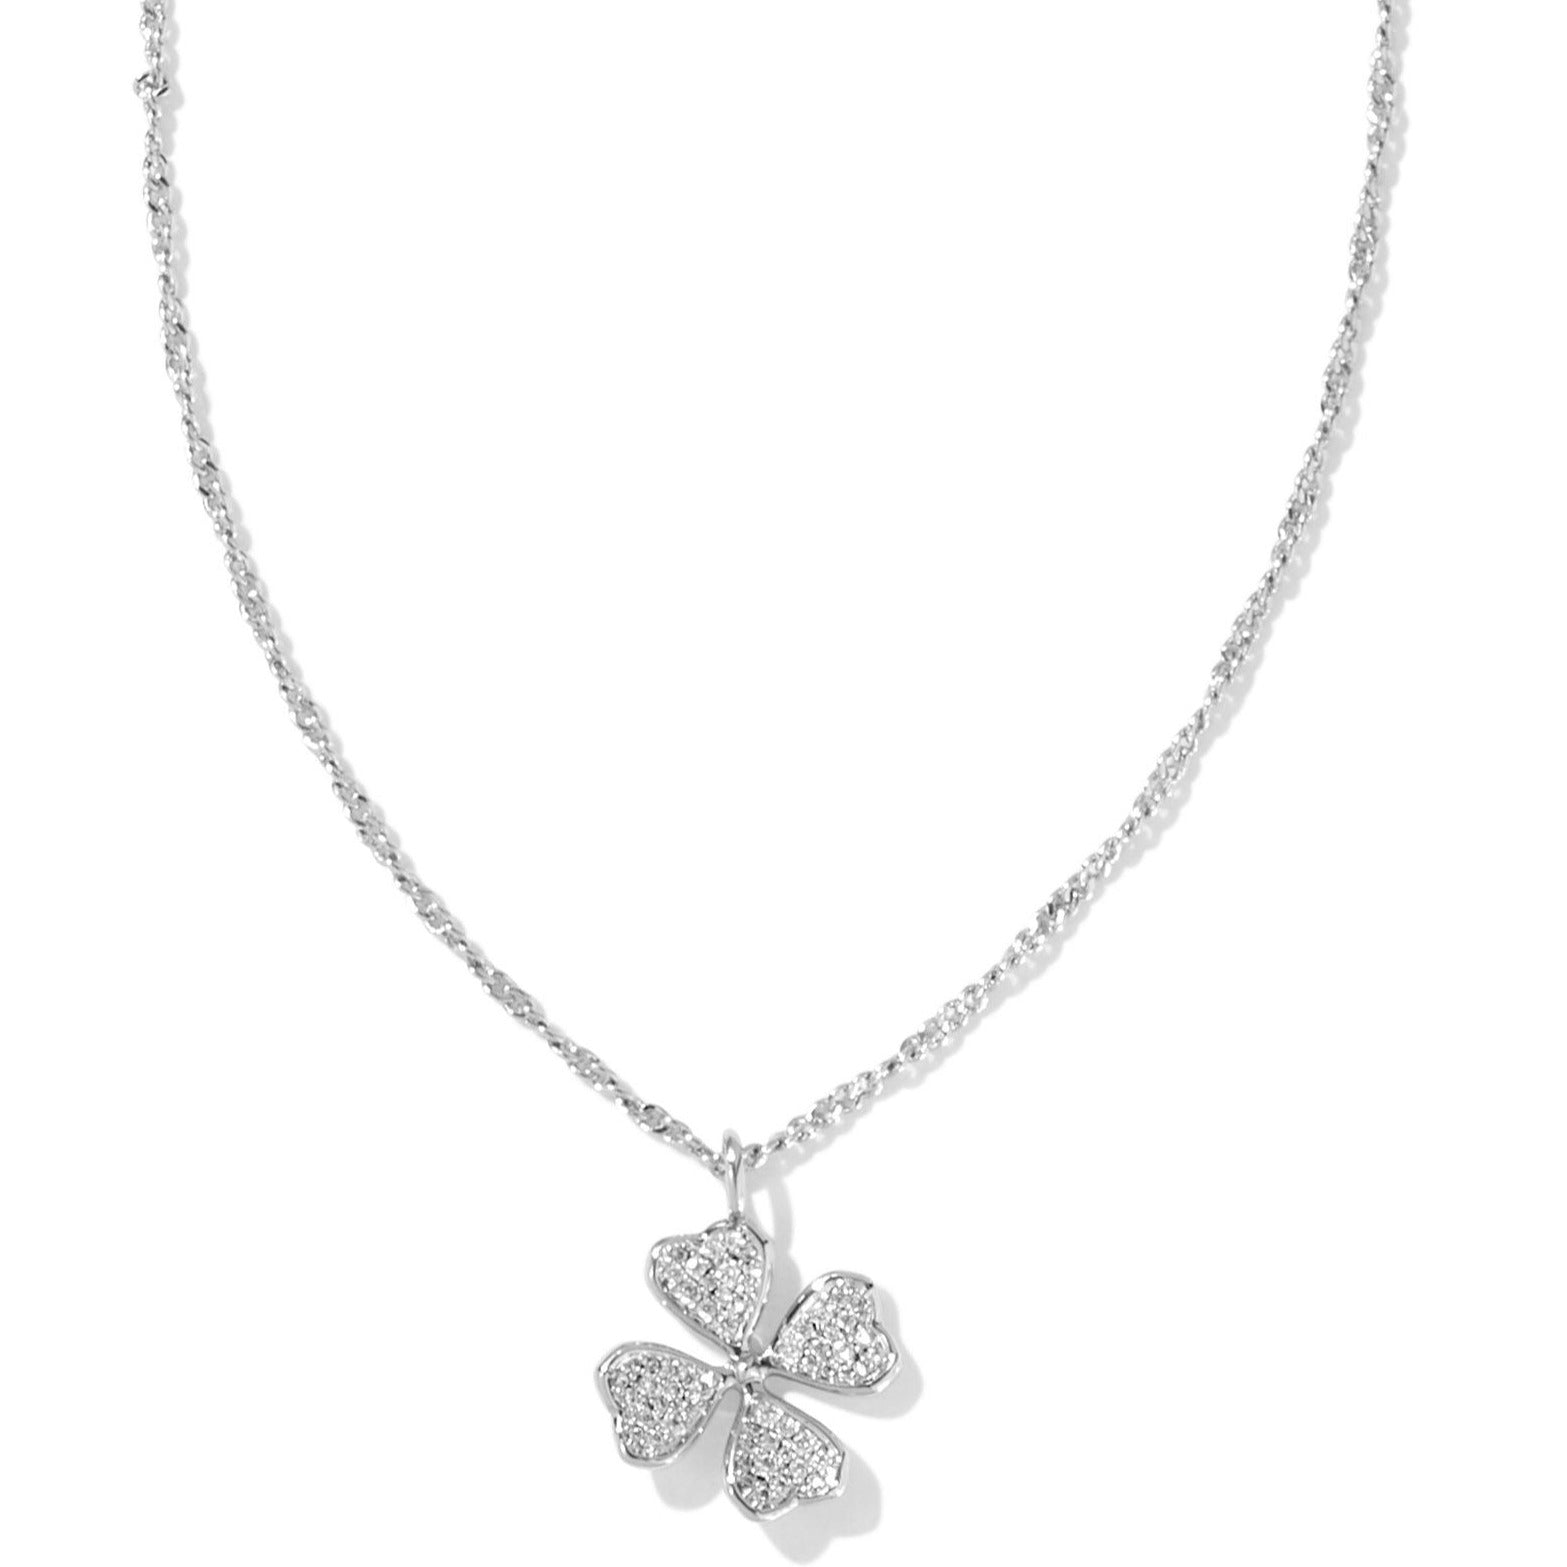 Kendra Scott | Clover Crystal Short Pendant Necklace in Silver - Giddy Up Glamour Boutique